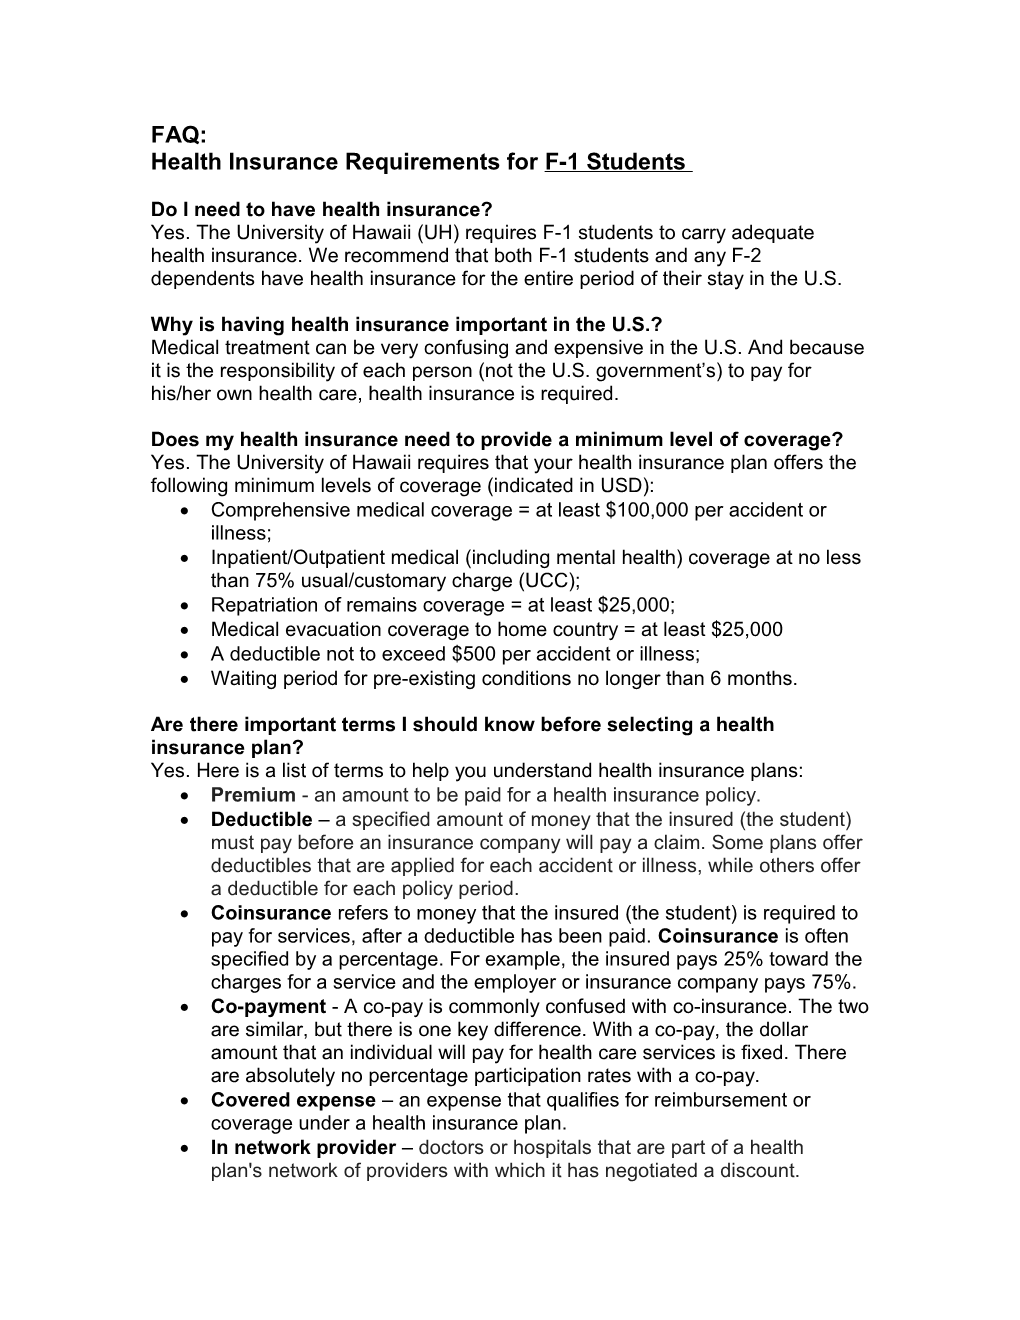 Health Insurance Requirements for F-1 Students